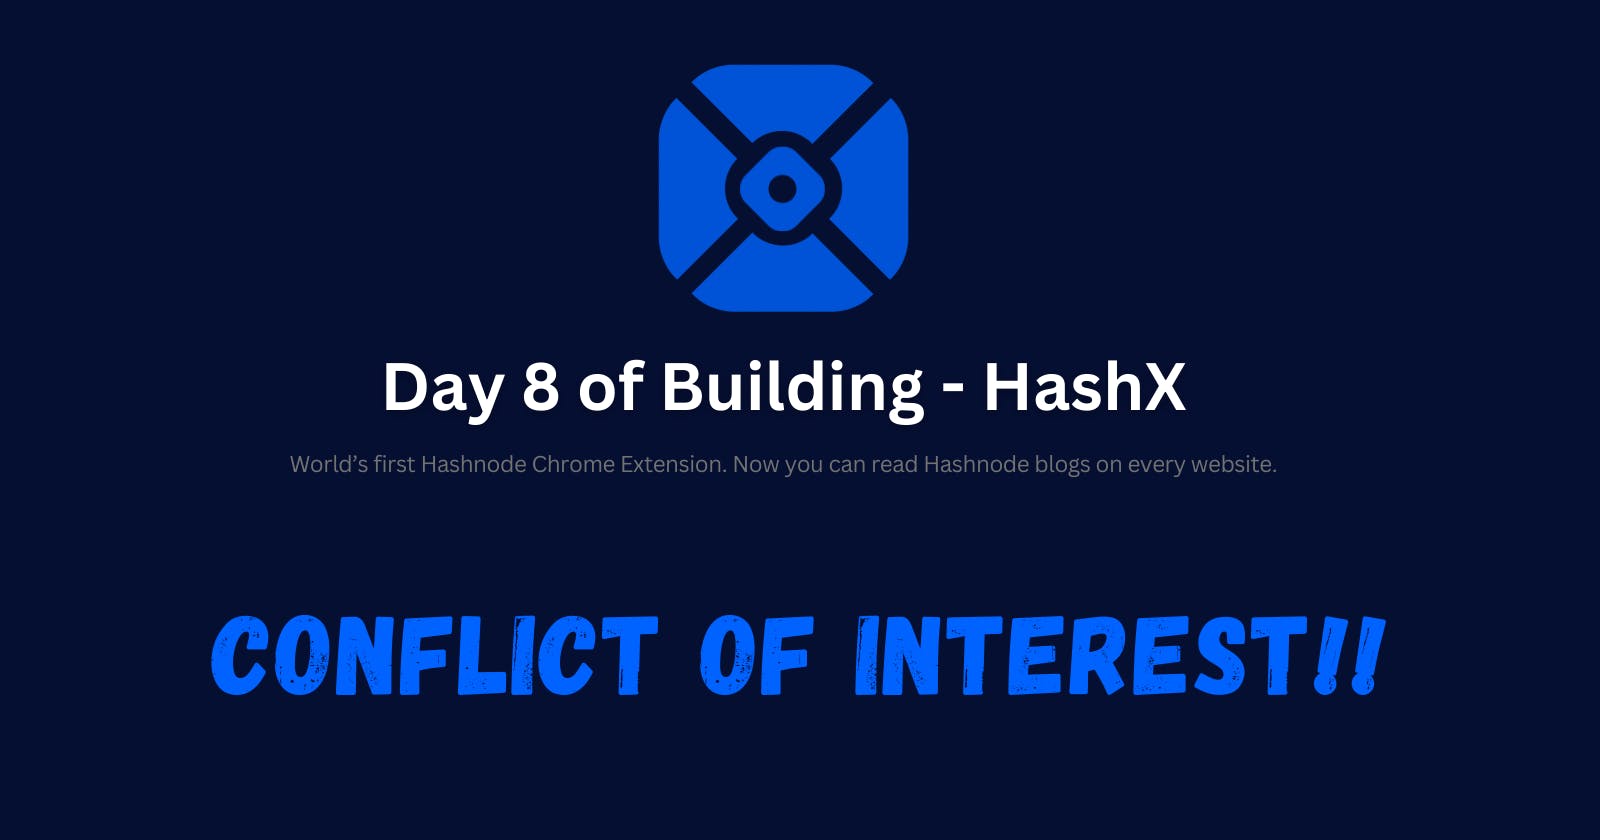 Day 8 - Conflict of interest!!